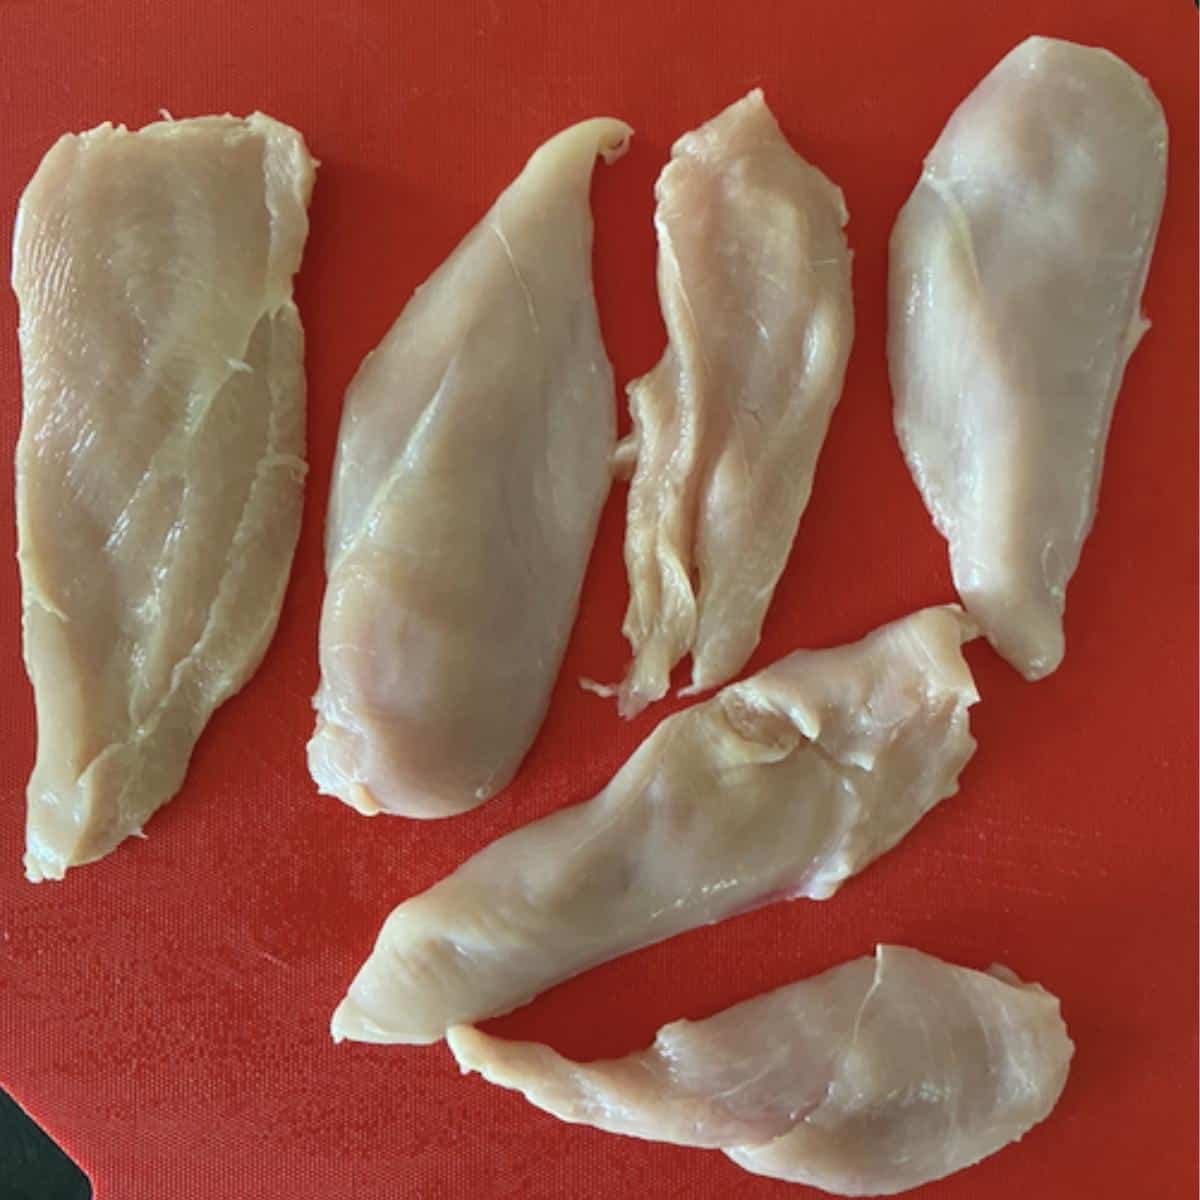 Chicken breast sliced in halves on red cutting board.